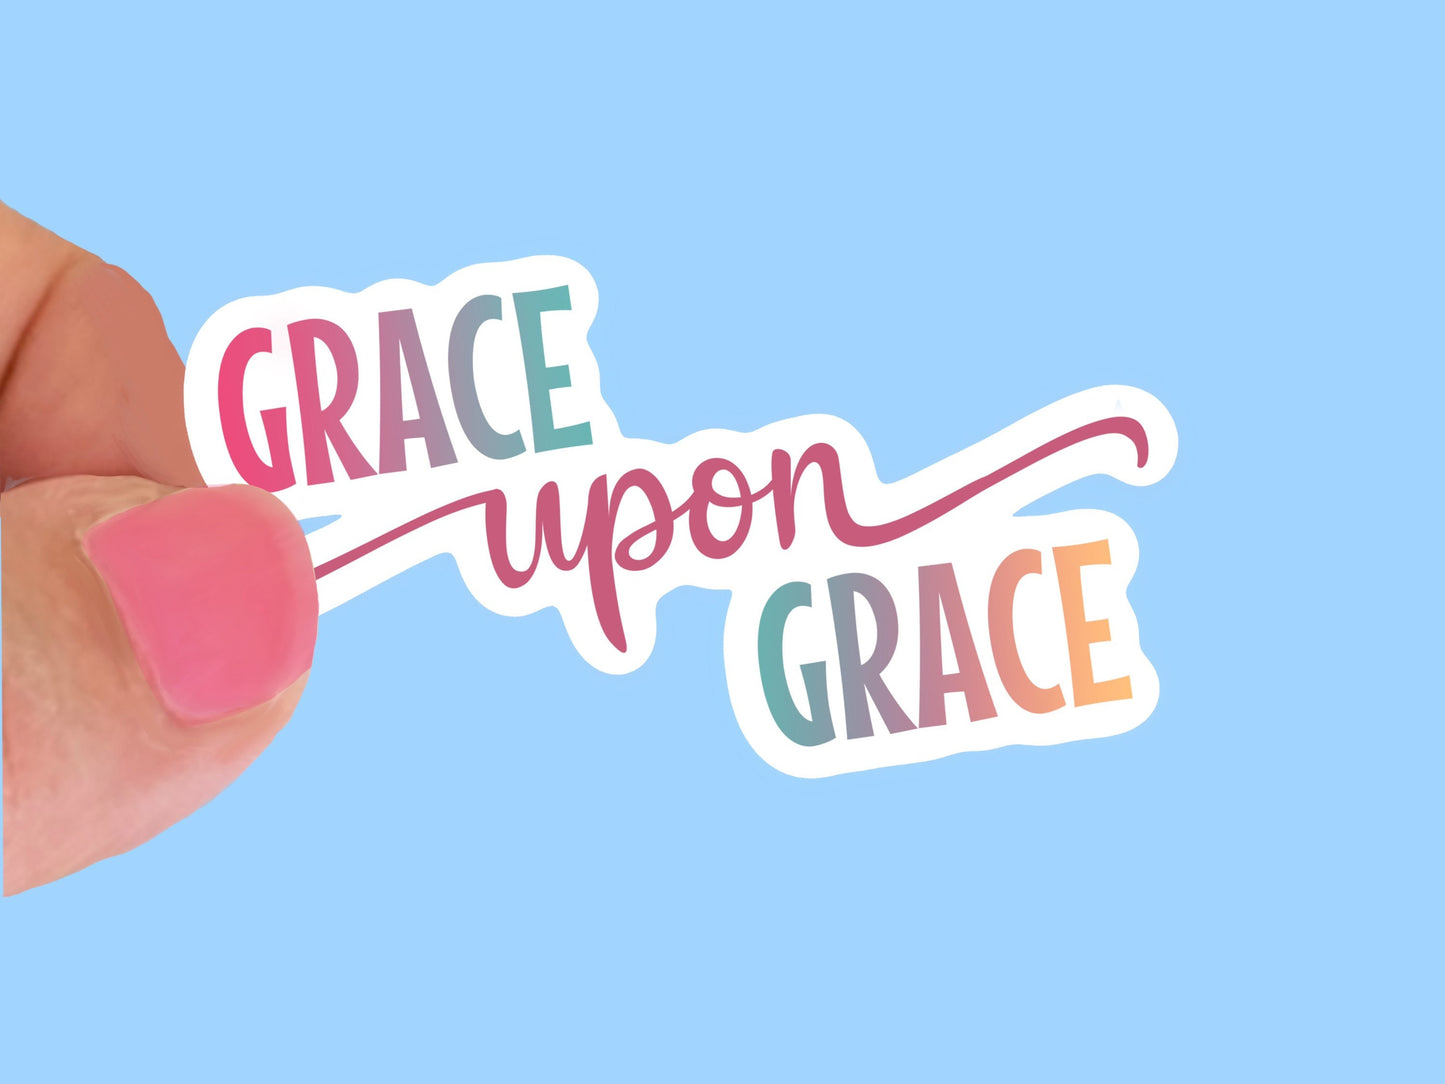 Grace upon Grace watercolor style , Waterproof Vinyl Sticker/ Decal- Choice of Size, Item 22605